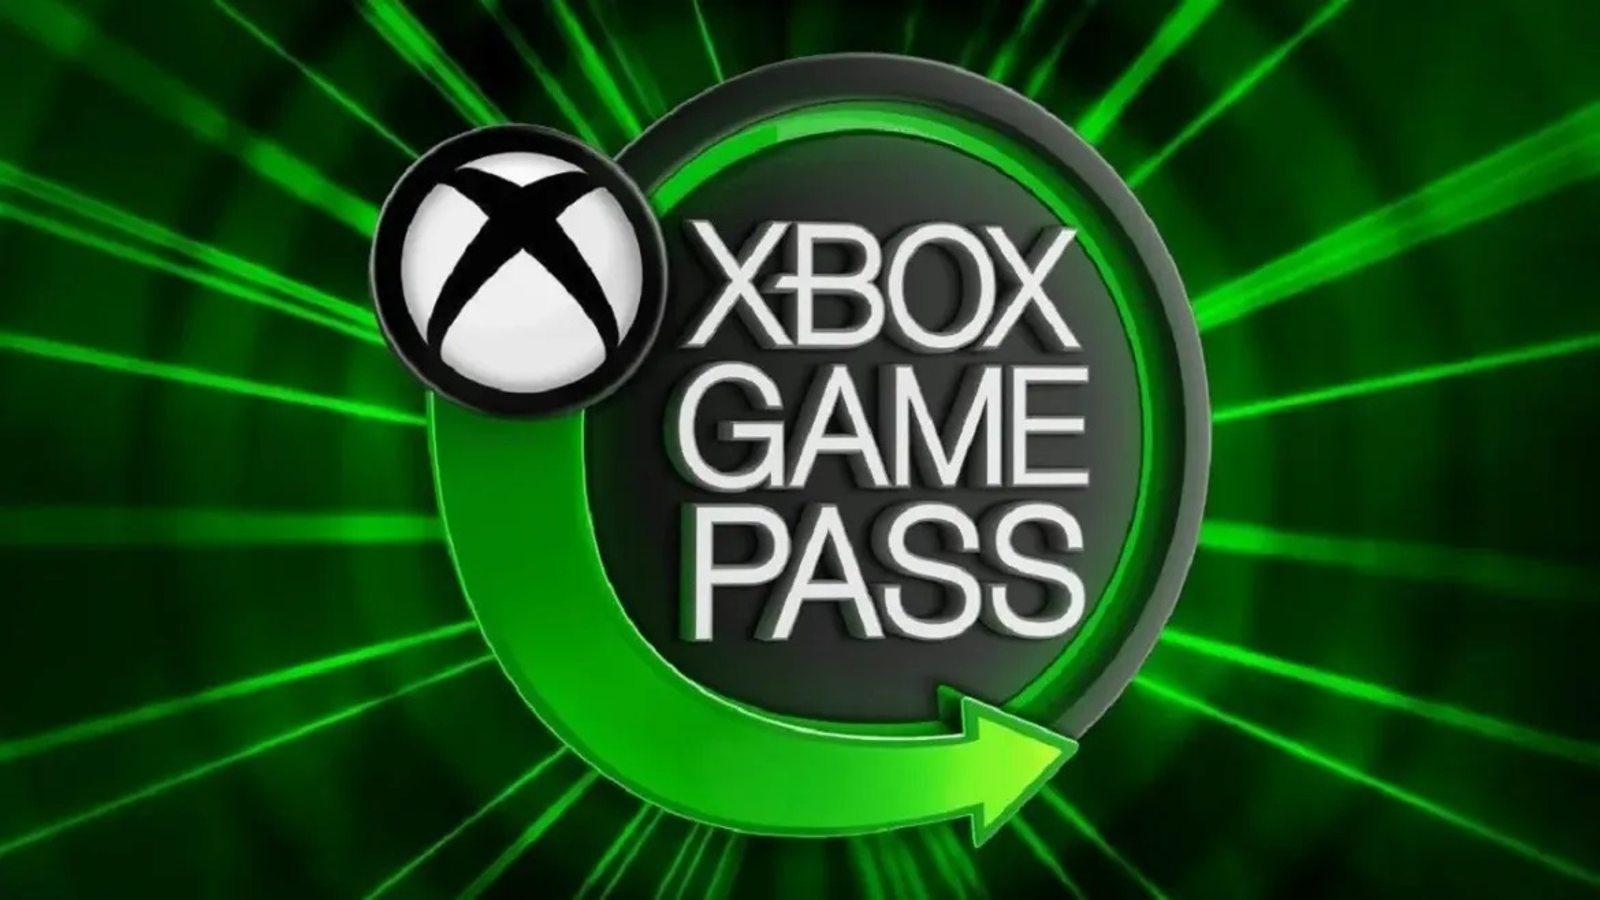 Xbox Game Pass – Getting Started